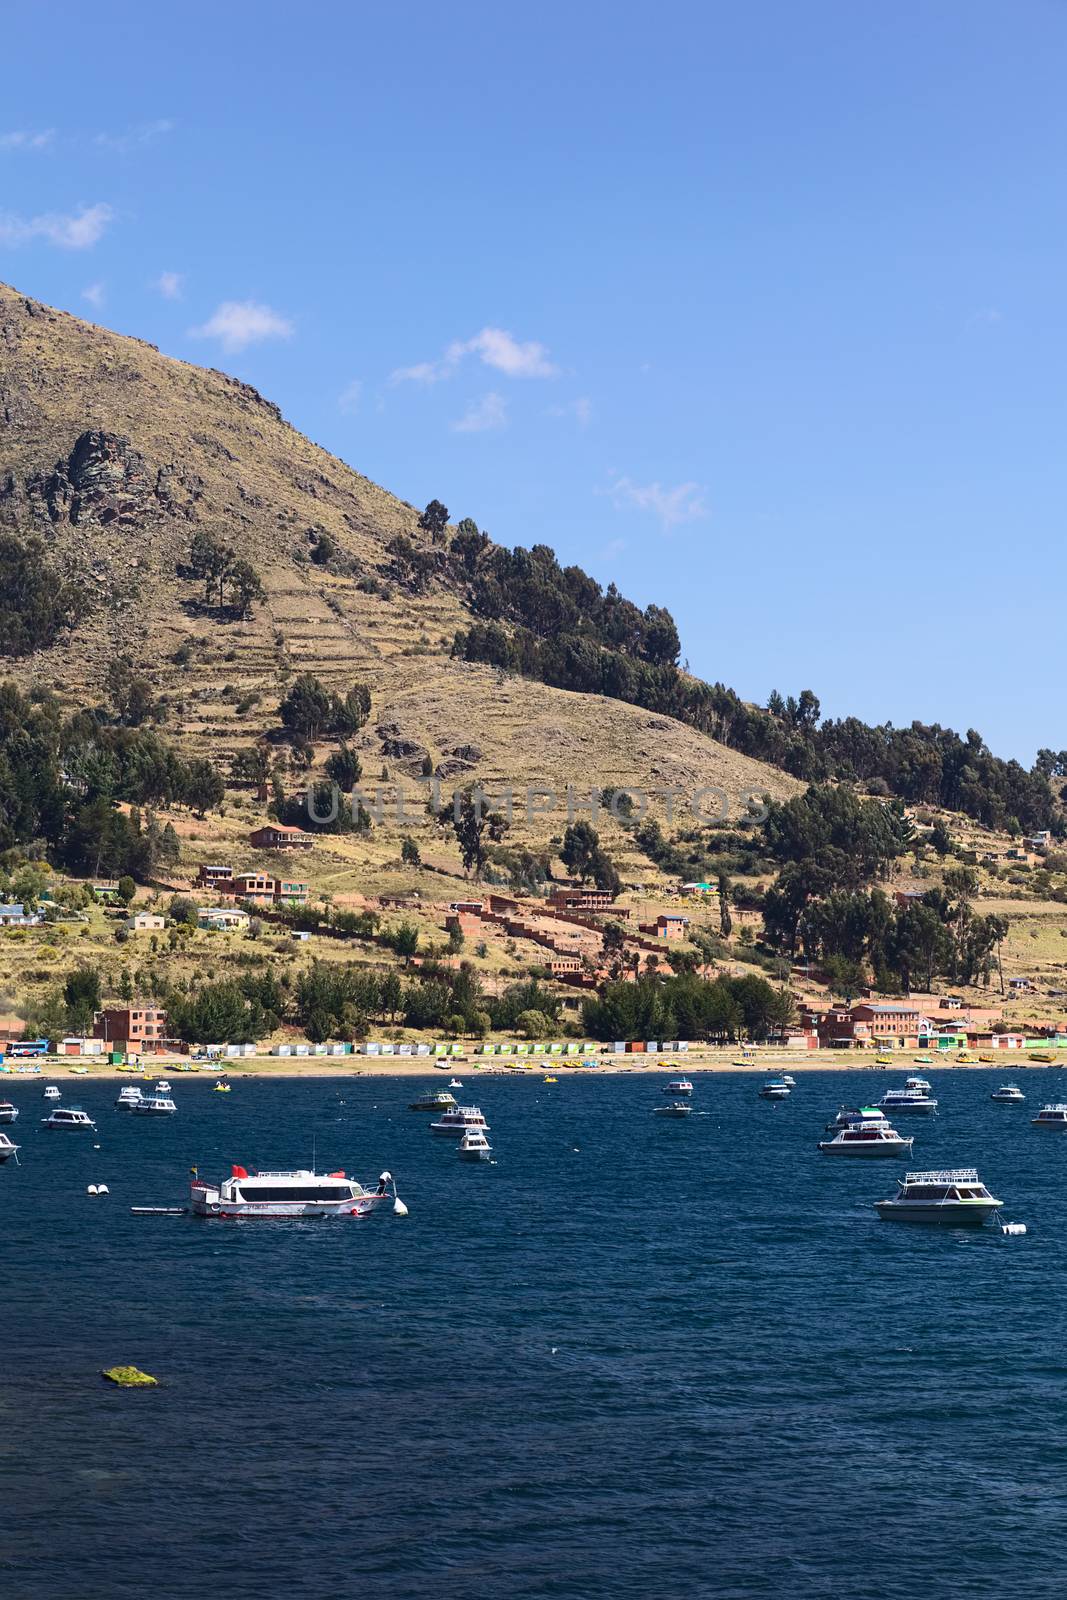 COPACABANA, BOLIVIA - OCTOBER 17, 2014: Motor boats anchoring in the bay of the small tourist town on the shore of Lake Titicaca on October 17, 2014 in Copacabana, Bolivia. Copacabana is the starting point for tours and transportation to Isla del Sol (Sun Island).